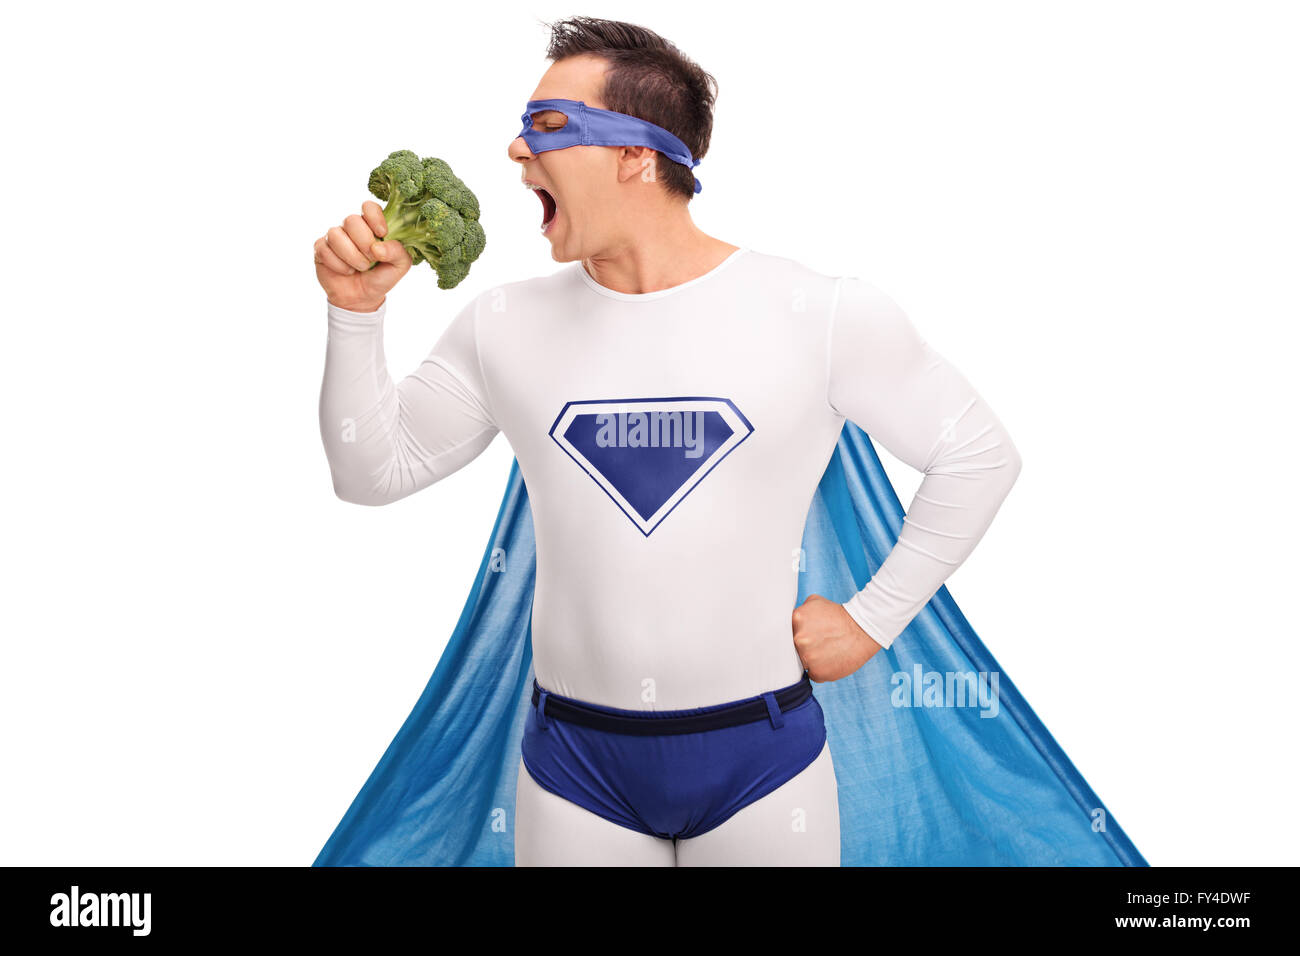 Young guy in a superhero outfit taking a bite of a large piece of broccoli isolated on white background Stock Photo